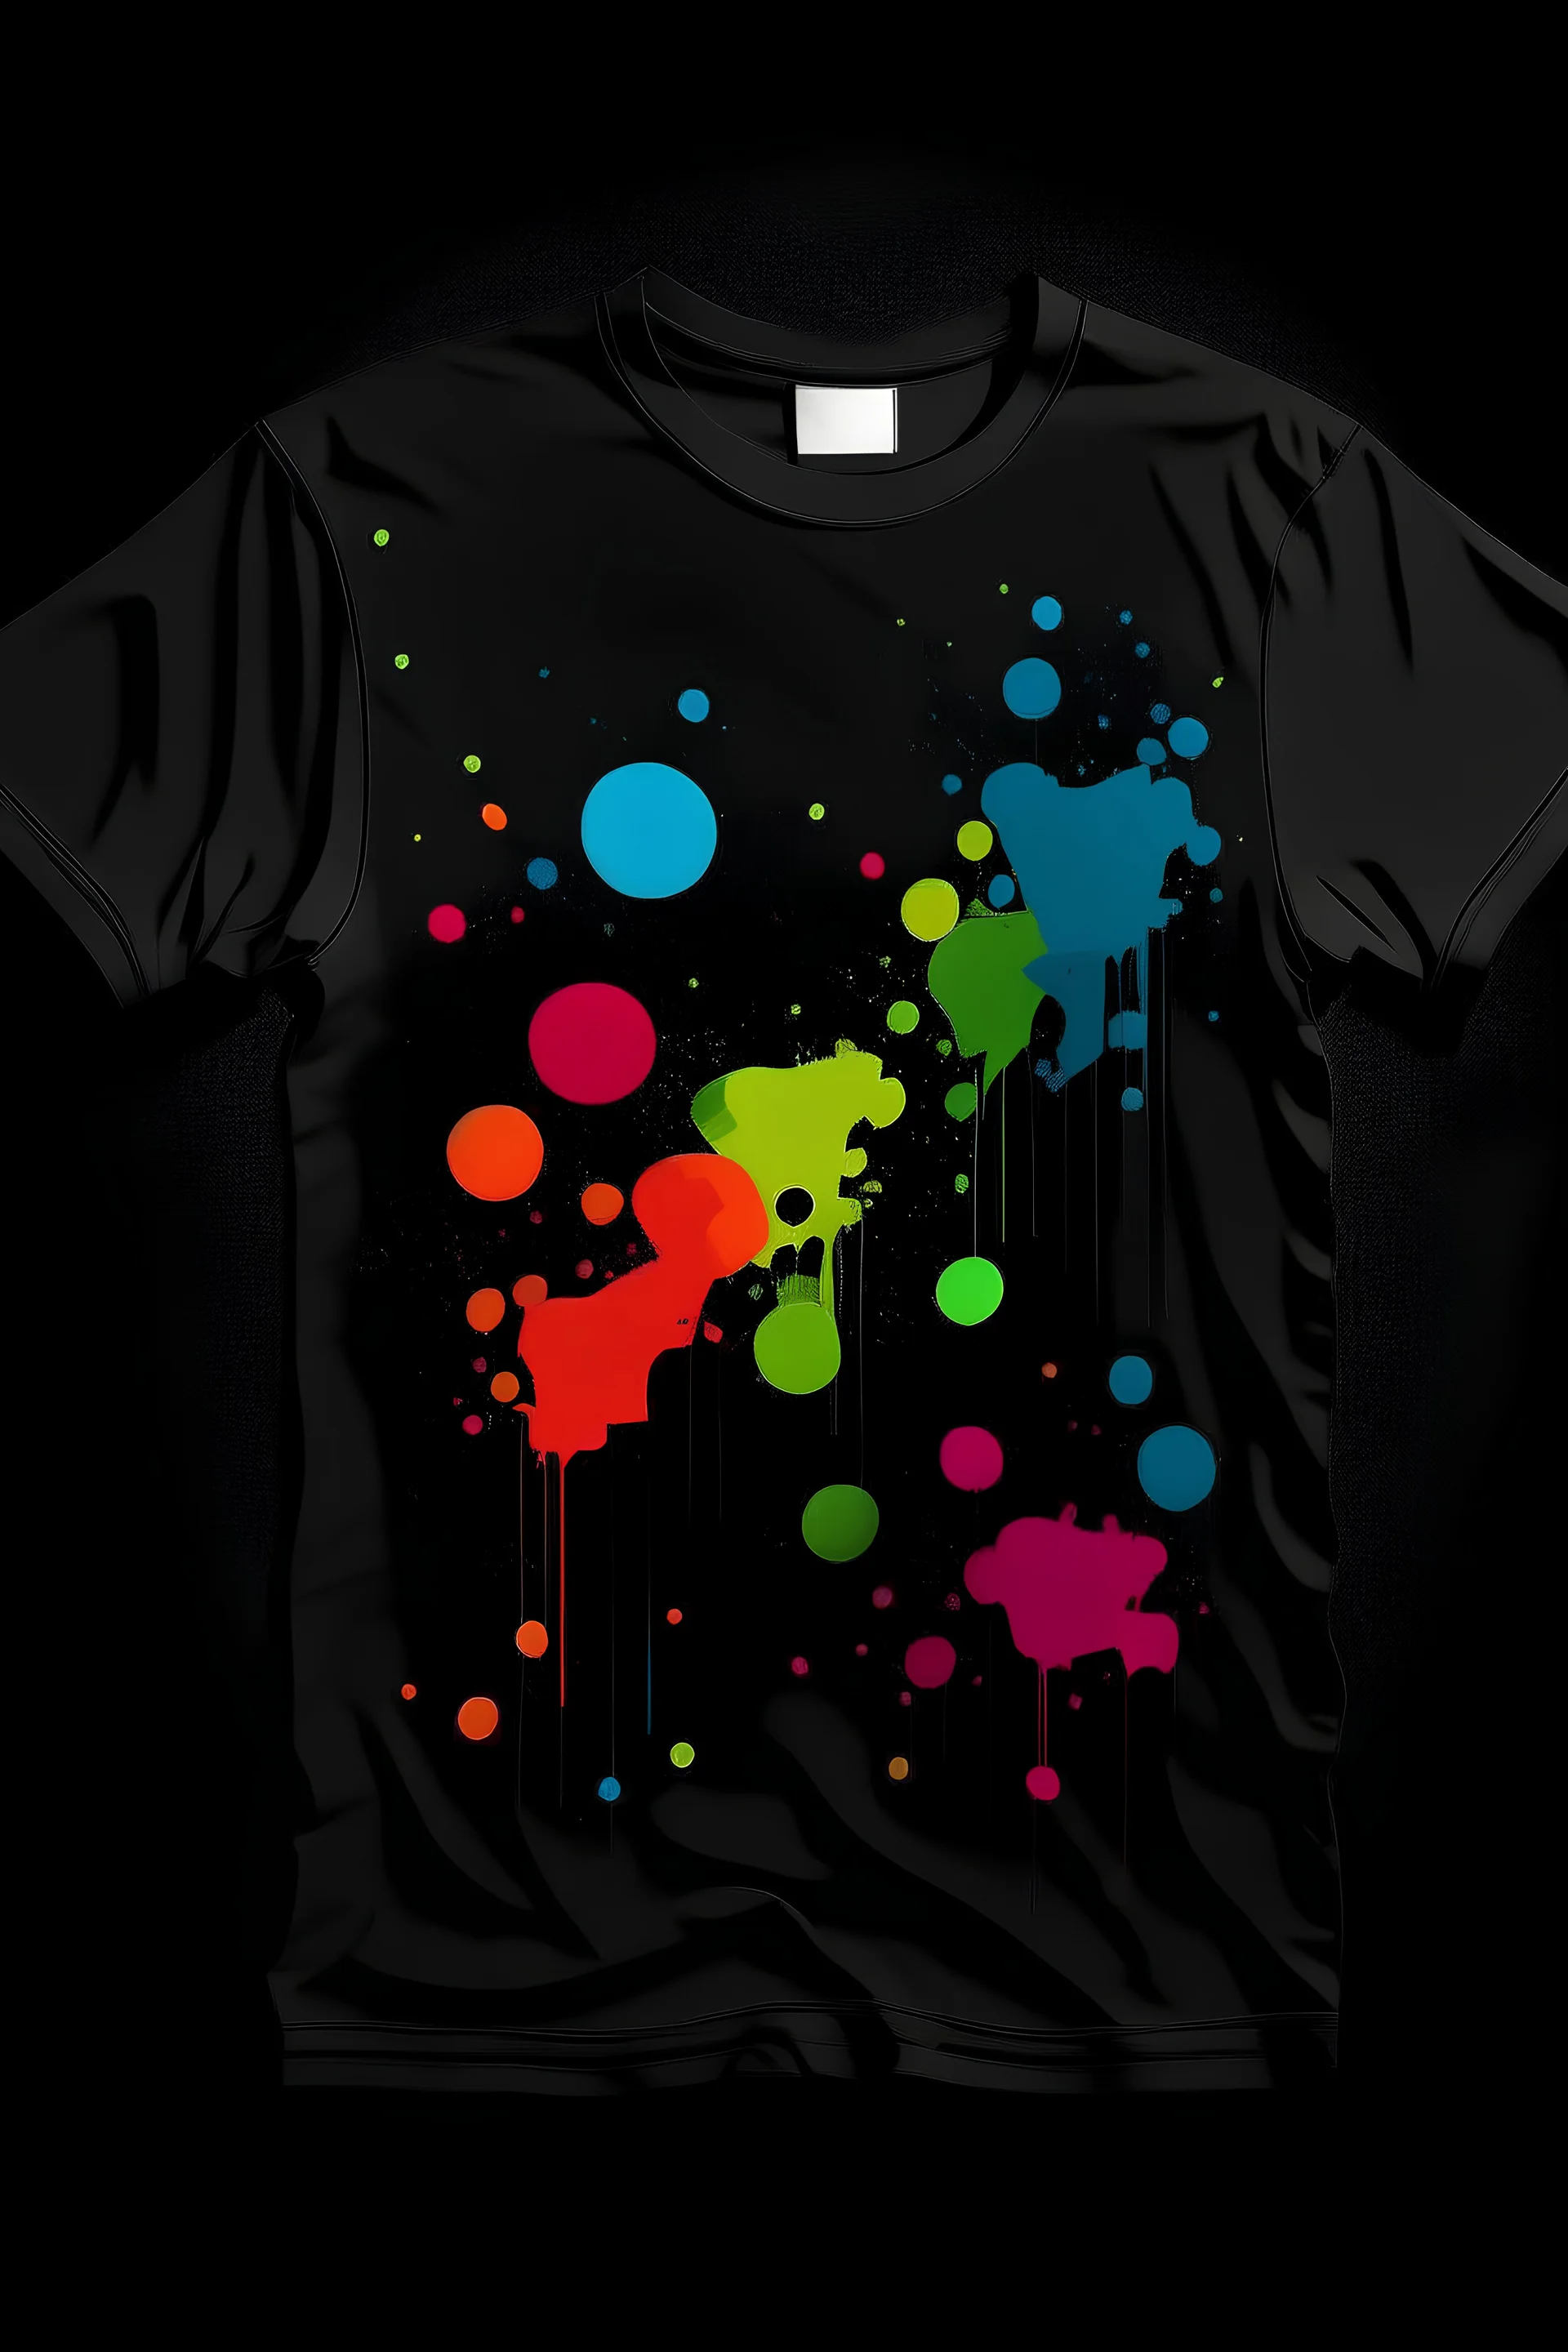 a black tshirt that color fade with shapes